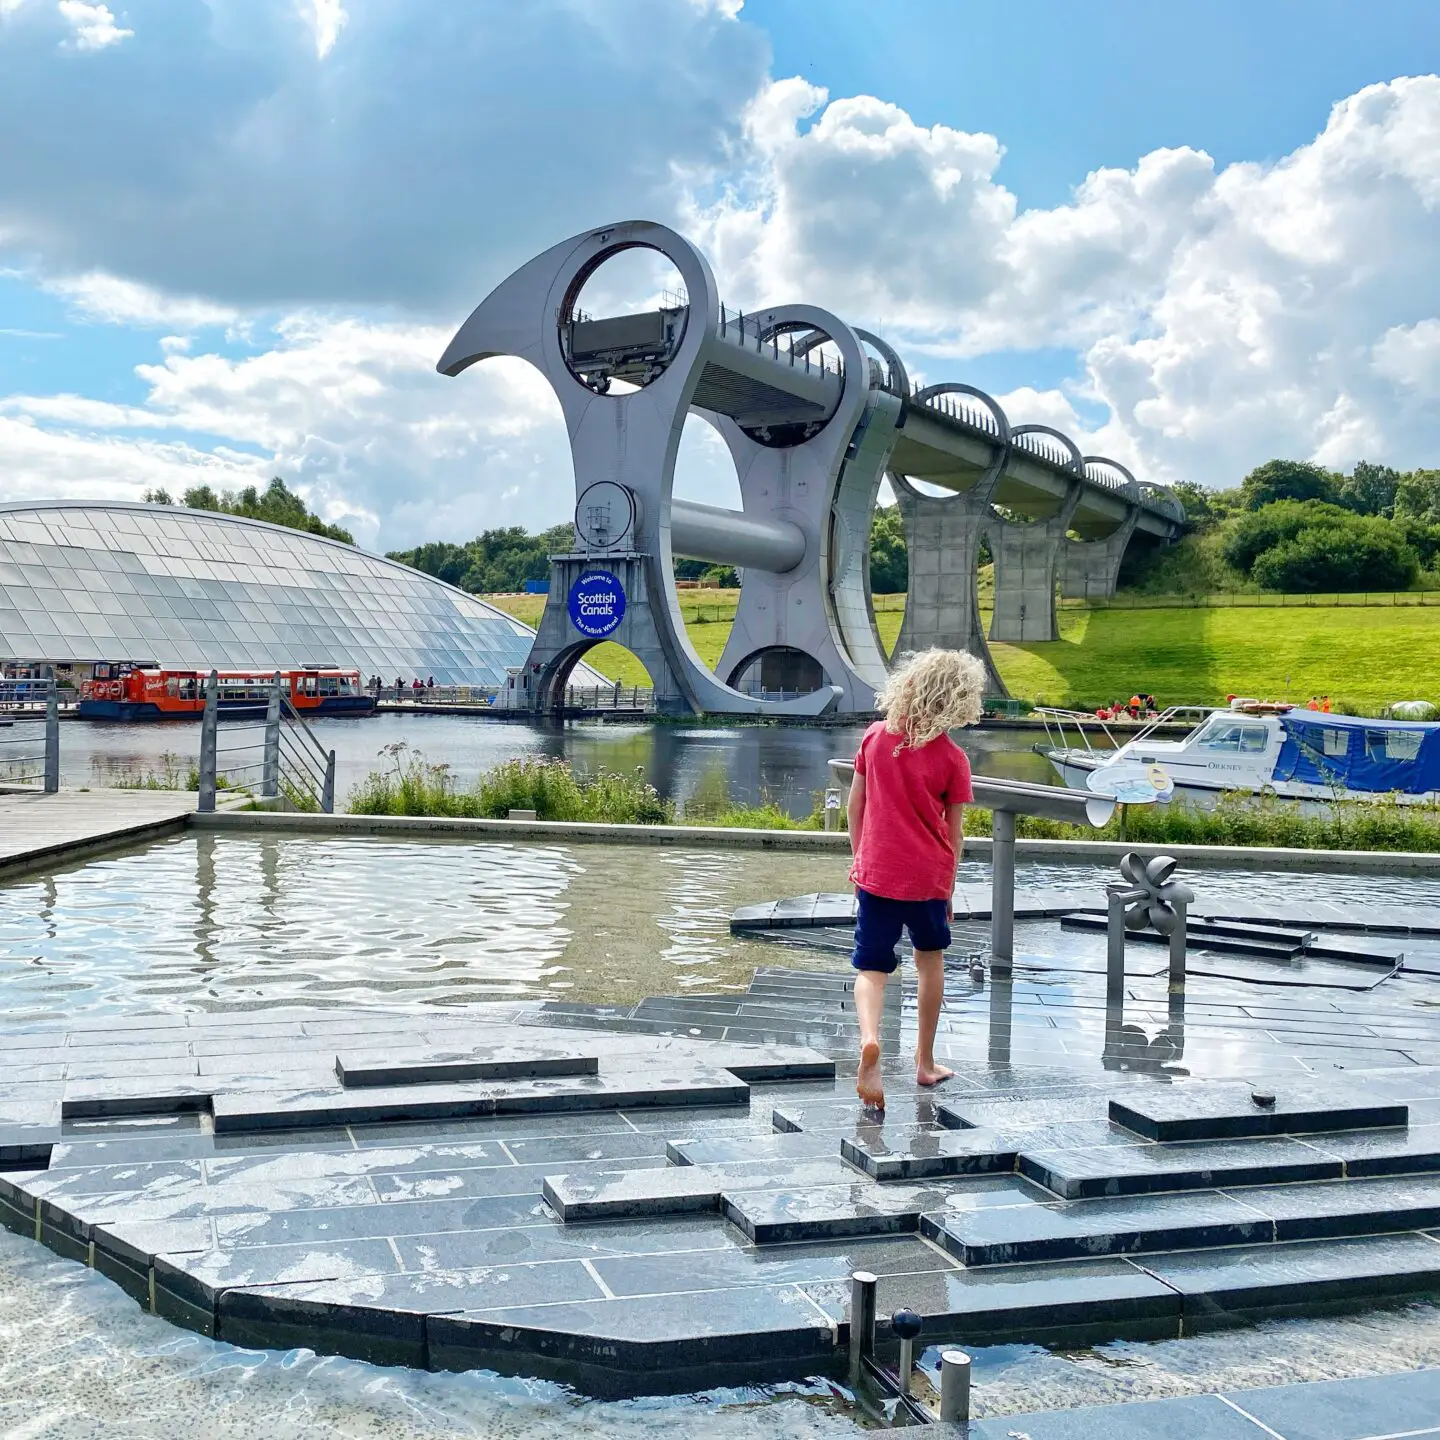 Learning about Scottish geography at the Falkirk wheel